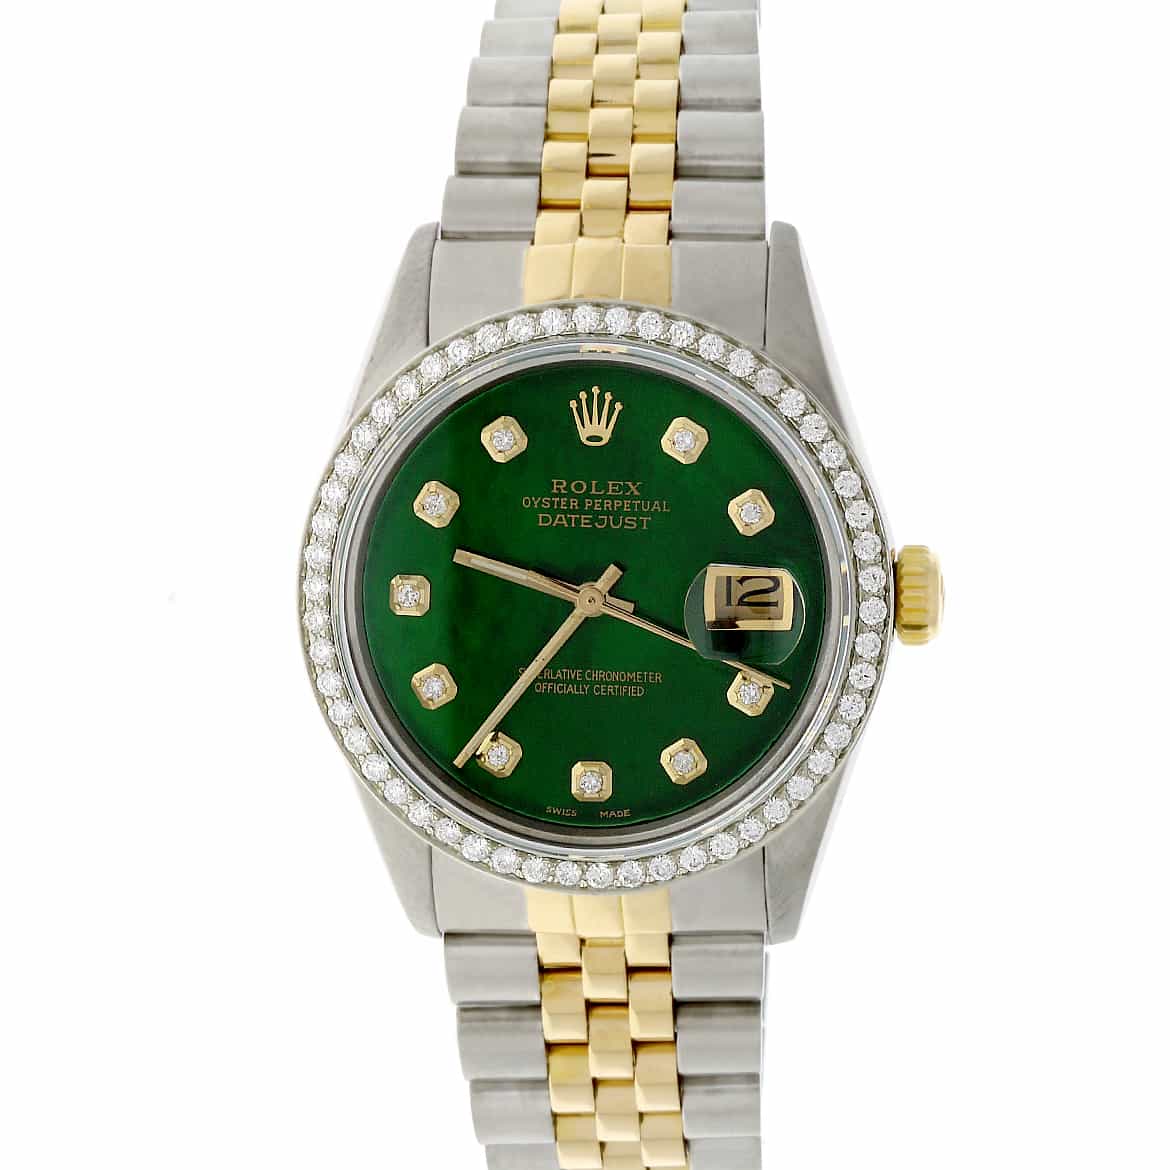 36mm Rolex 18k Yellow Gold and Stainless Steel Oyster Perpetual Datejust  Watch.